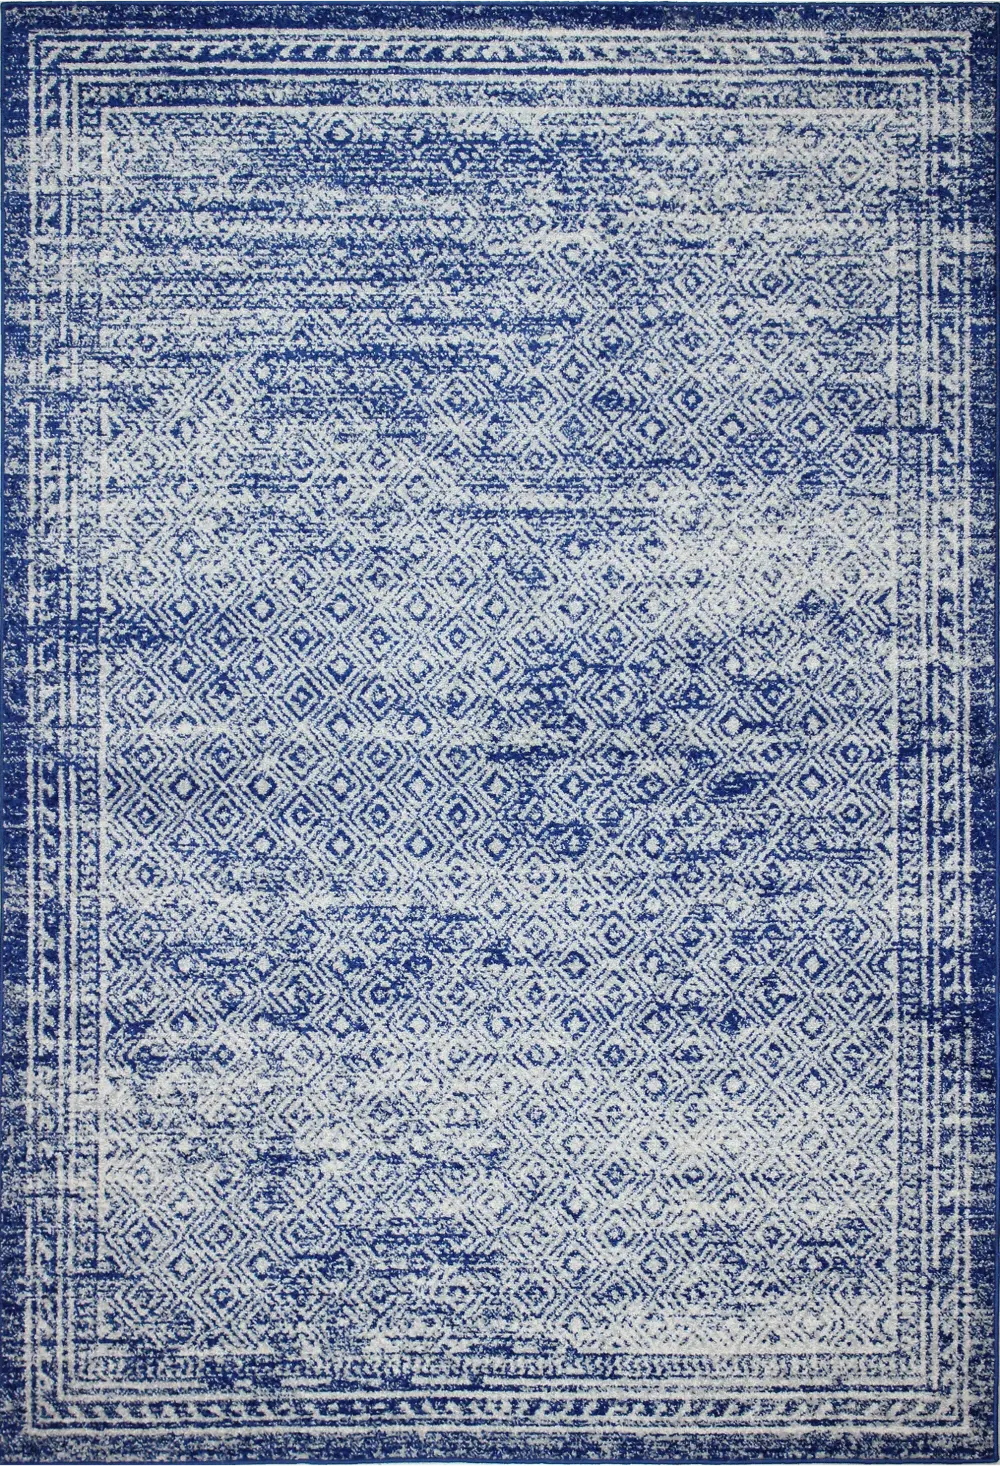 M147-DKBL-4X6-MR607 4 x 6 Small Transitional Zaylee Blue Rug - Mayfair-1